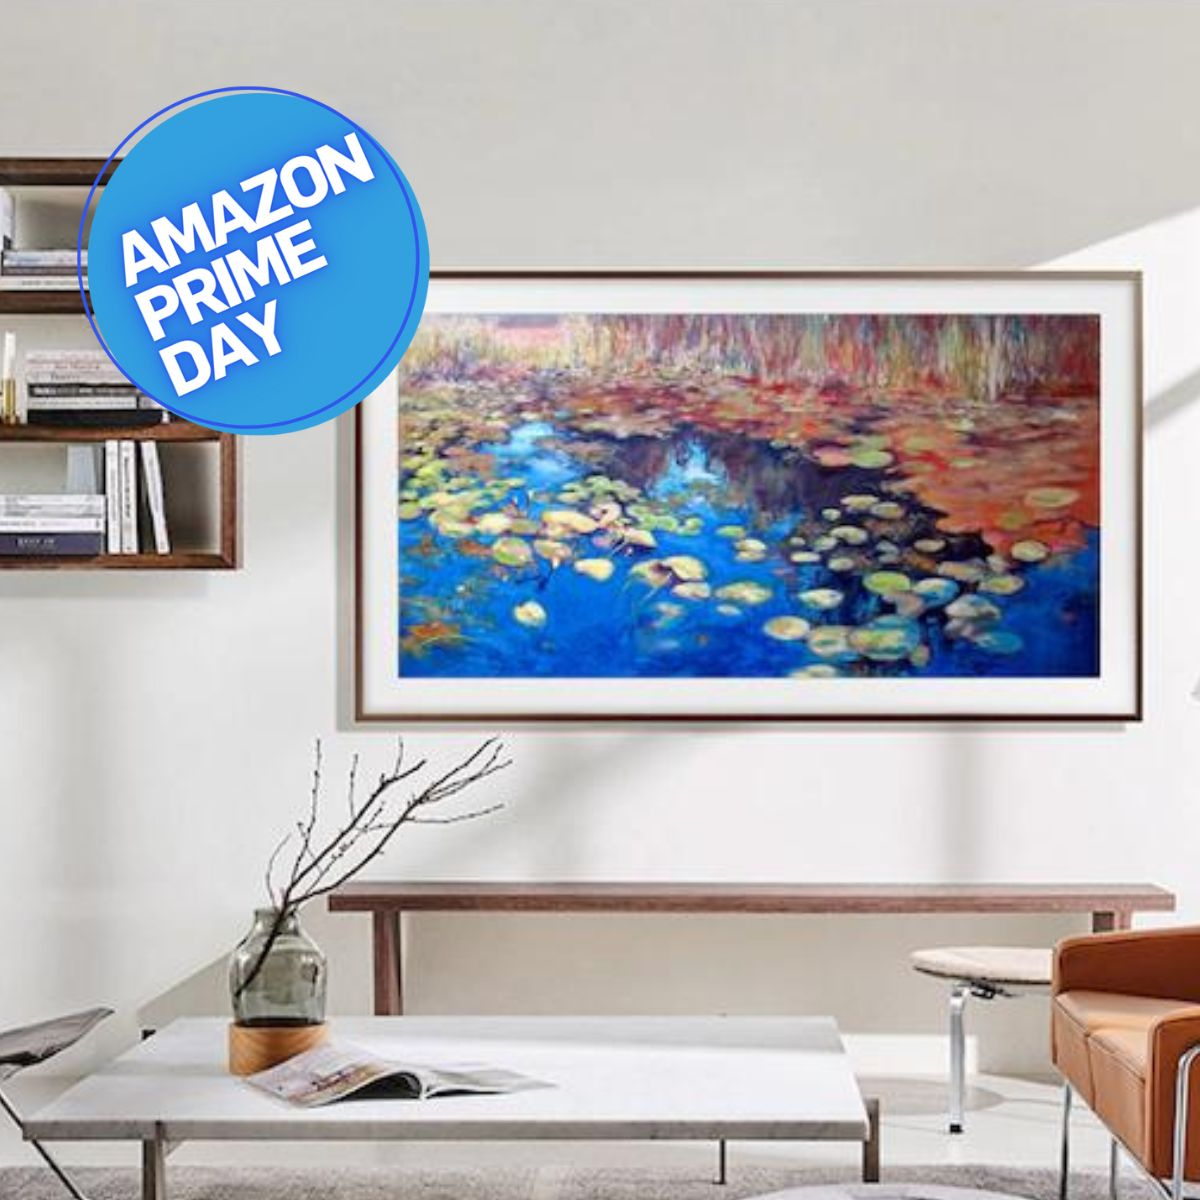 https://akns-images.eonline.com/eol_images/Entire_Site/202399/rs_1200x1200-231009144756-Amazon_Prime_Day_Sticker_Thumbnail.jpg?fit=around%7C1080:540&output-quality=90&crop=1080:540;center,top